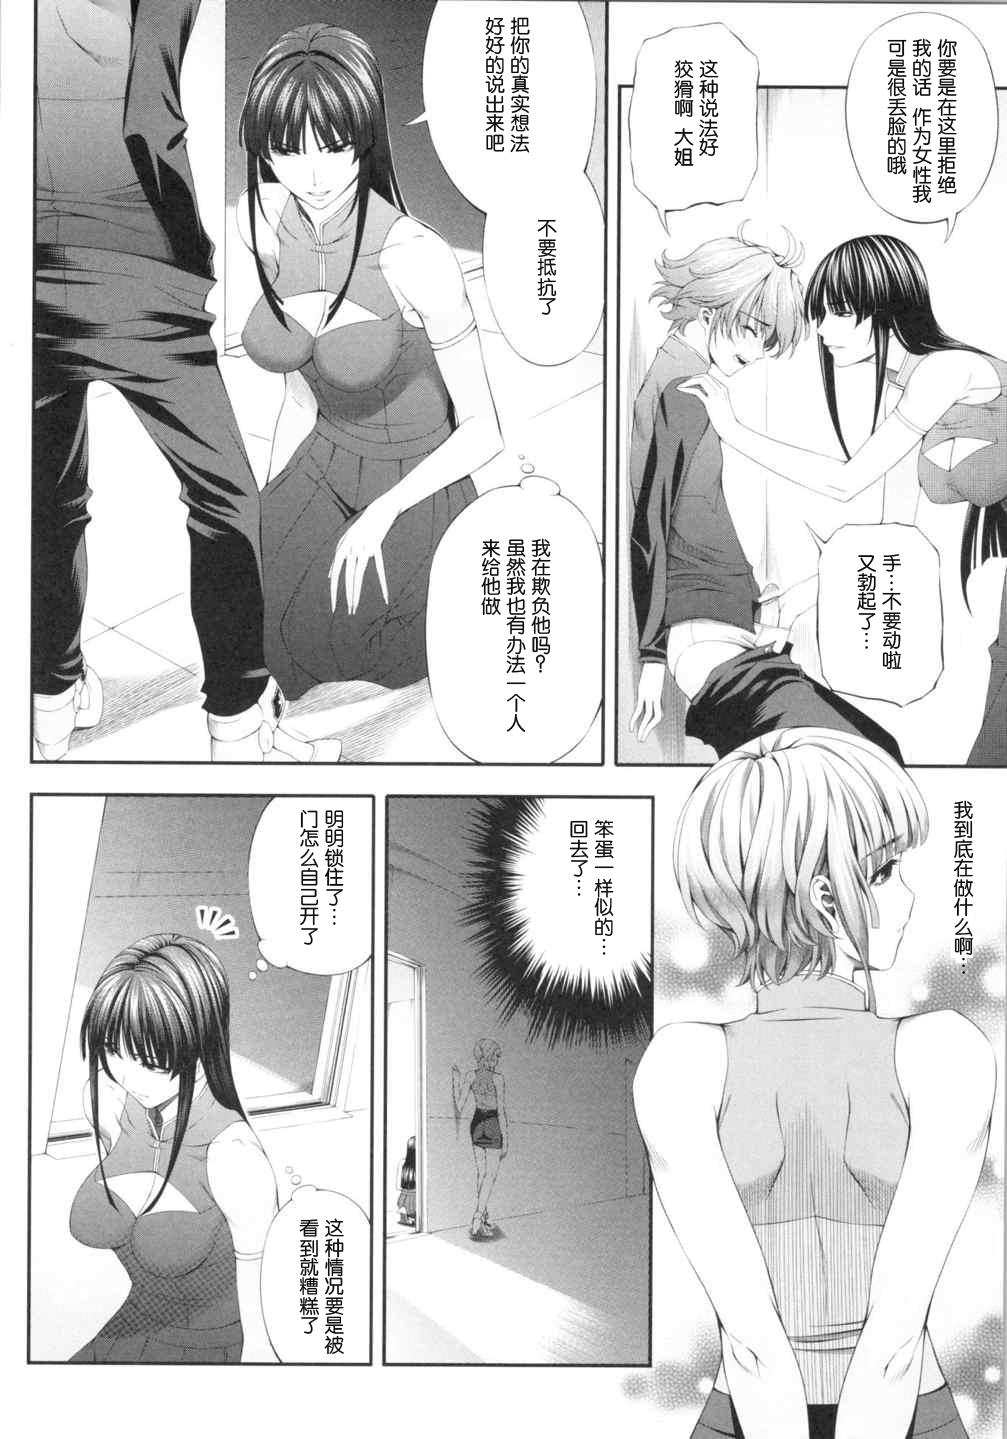 Realsex Ouka of book - Super robot wars Gay Medical - Page 5